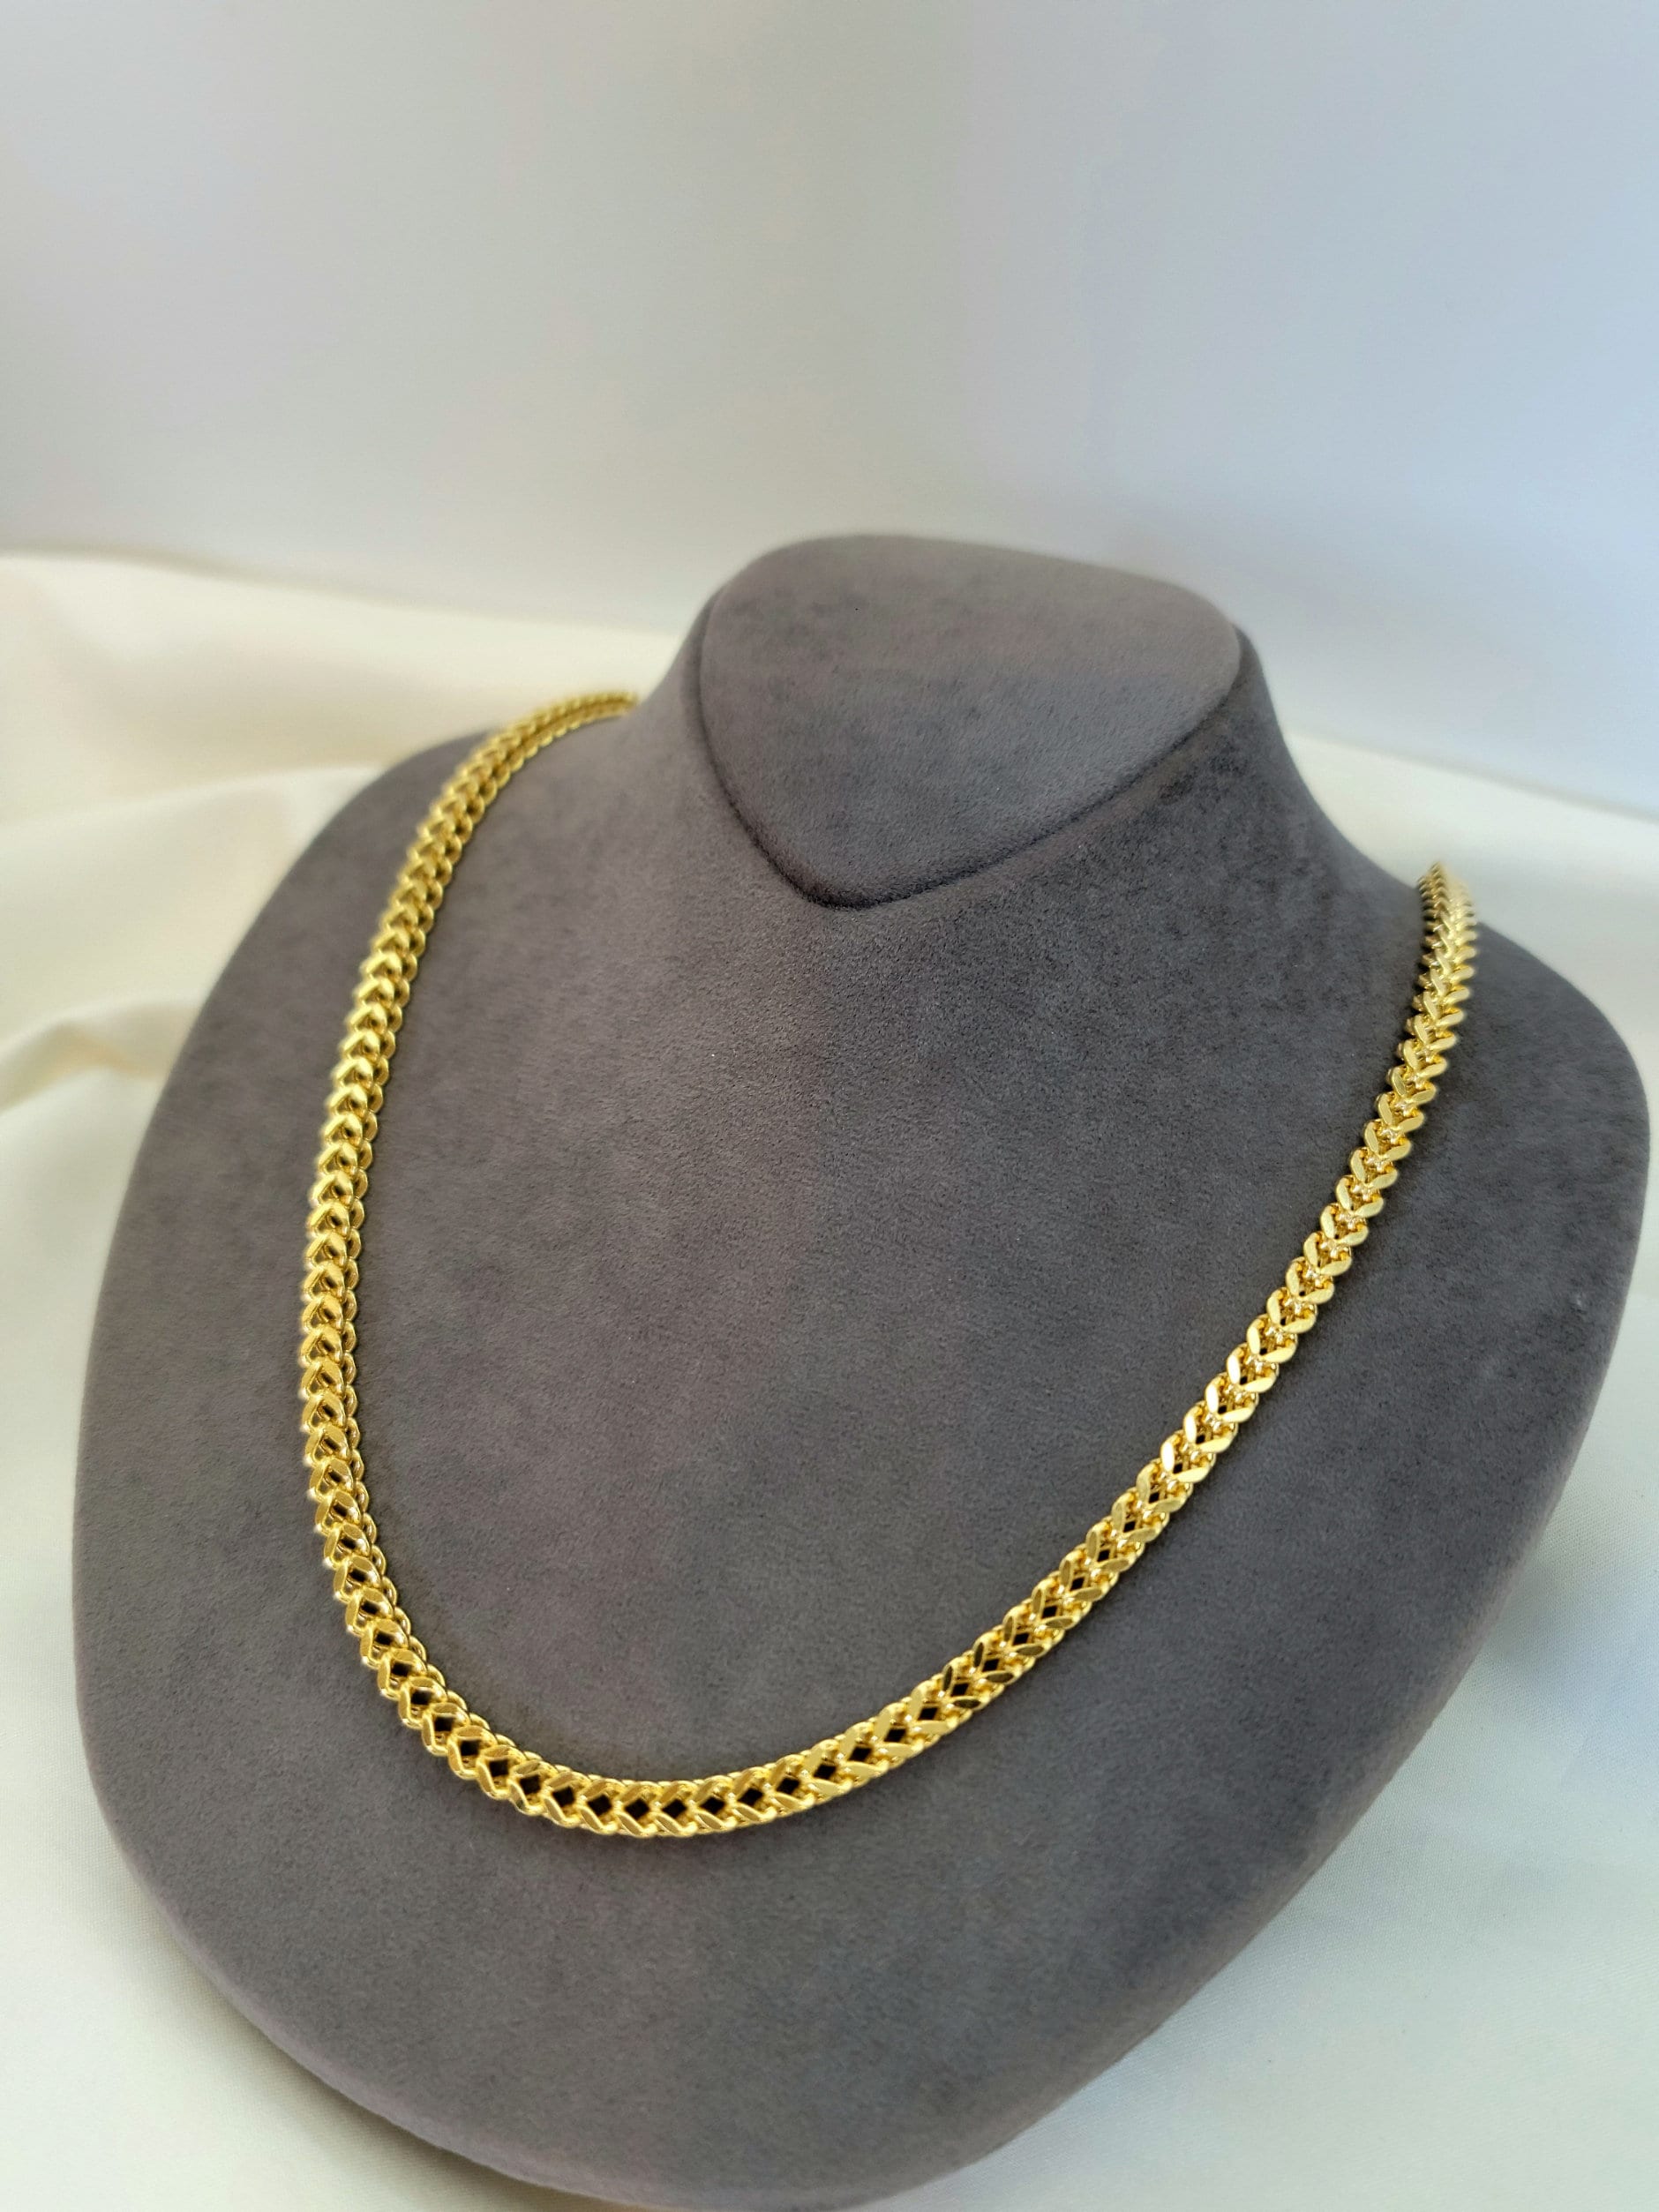 5mm Diamond Cut Franco, 14K Gold Chain Men’s, Solid Gold Necklace 22 Inches / Lion & Snake Clasp